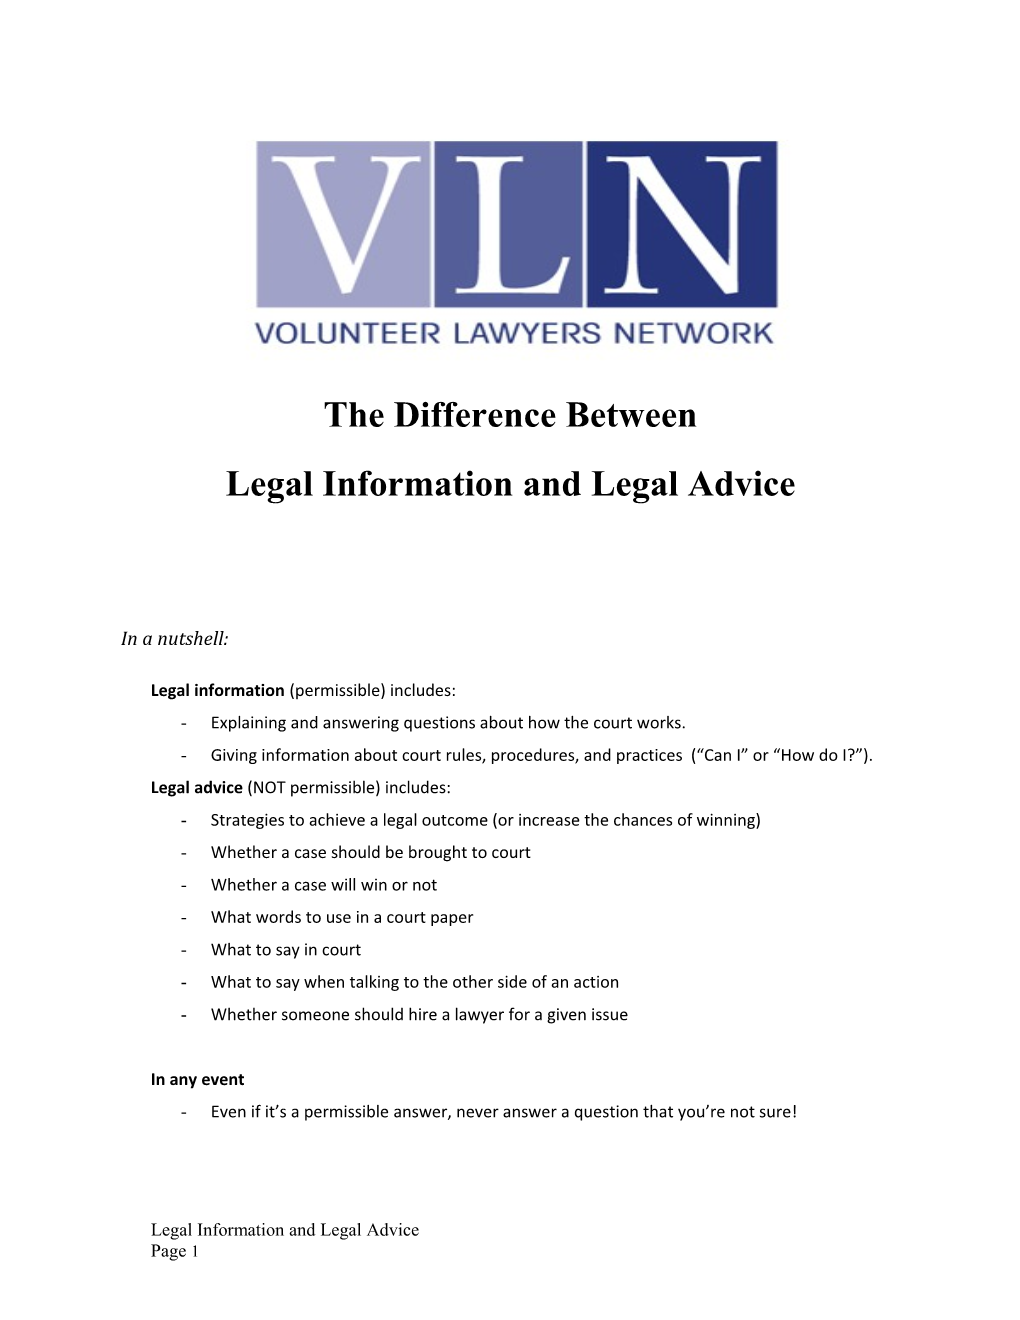 Legal Information and Legal Advice